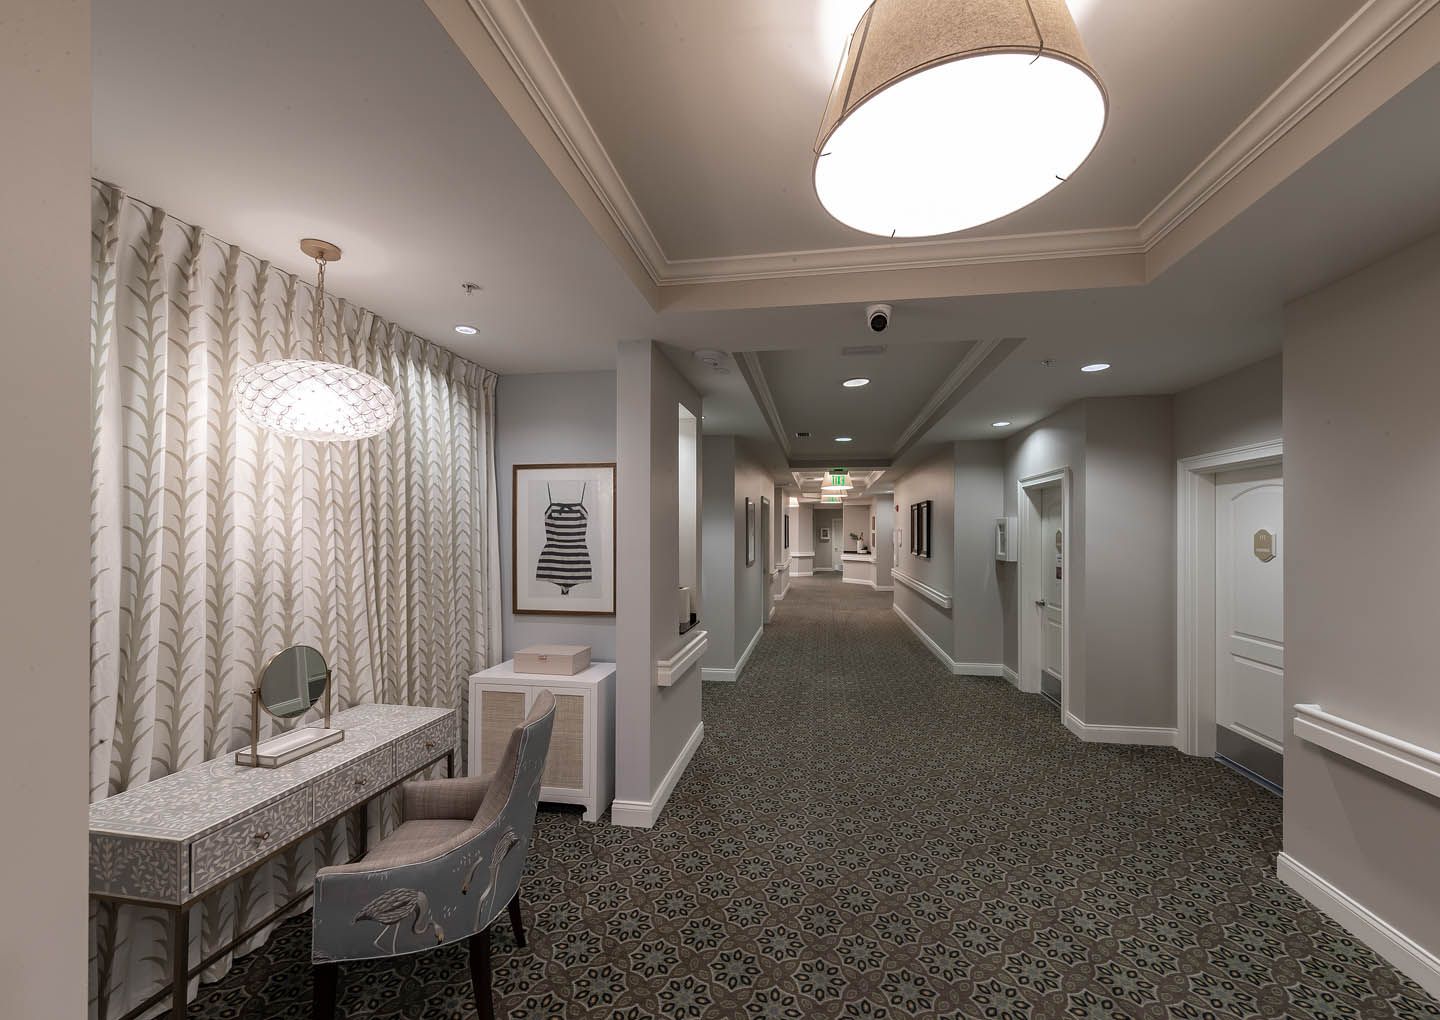 Interior view of The Estate At Hyde Park senior living community featuring a hallway, floor, chandelier, and lamp.